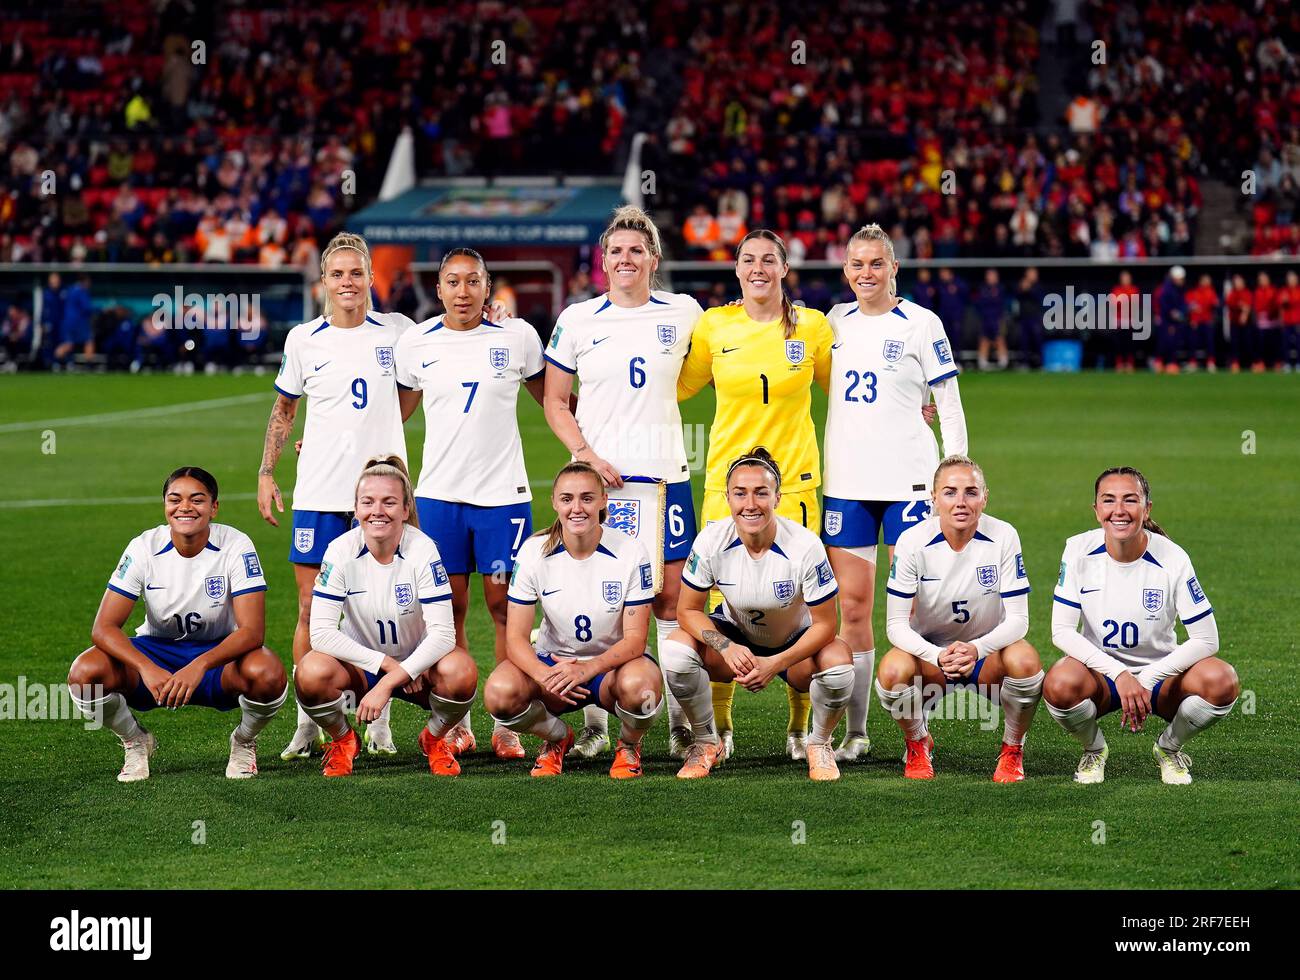 England starting line up: Back Row - Rachel Daly, Lauren James, Millie Bright, goalkeeper Mary Earps and Alessia Russo. Front Row - Jess Carter, Lauren Hemp, Georgia Stanway, Lucy Bronze, Alex Greenwood and Katie Zelem during the FIFA Women's World Cup 2023, Group D match at the Hindmarsh Stadium, Adelaide, Australia. Picture date: Tuesday August 1, 2023. Stock Photo